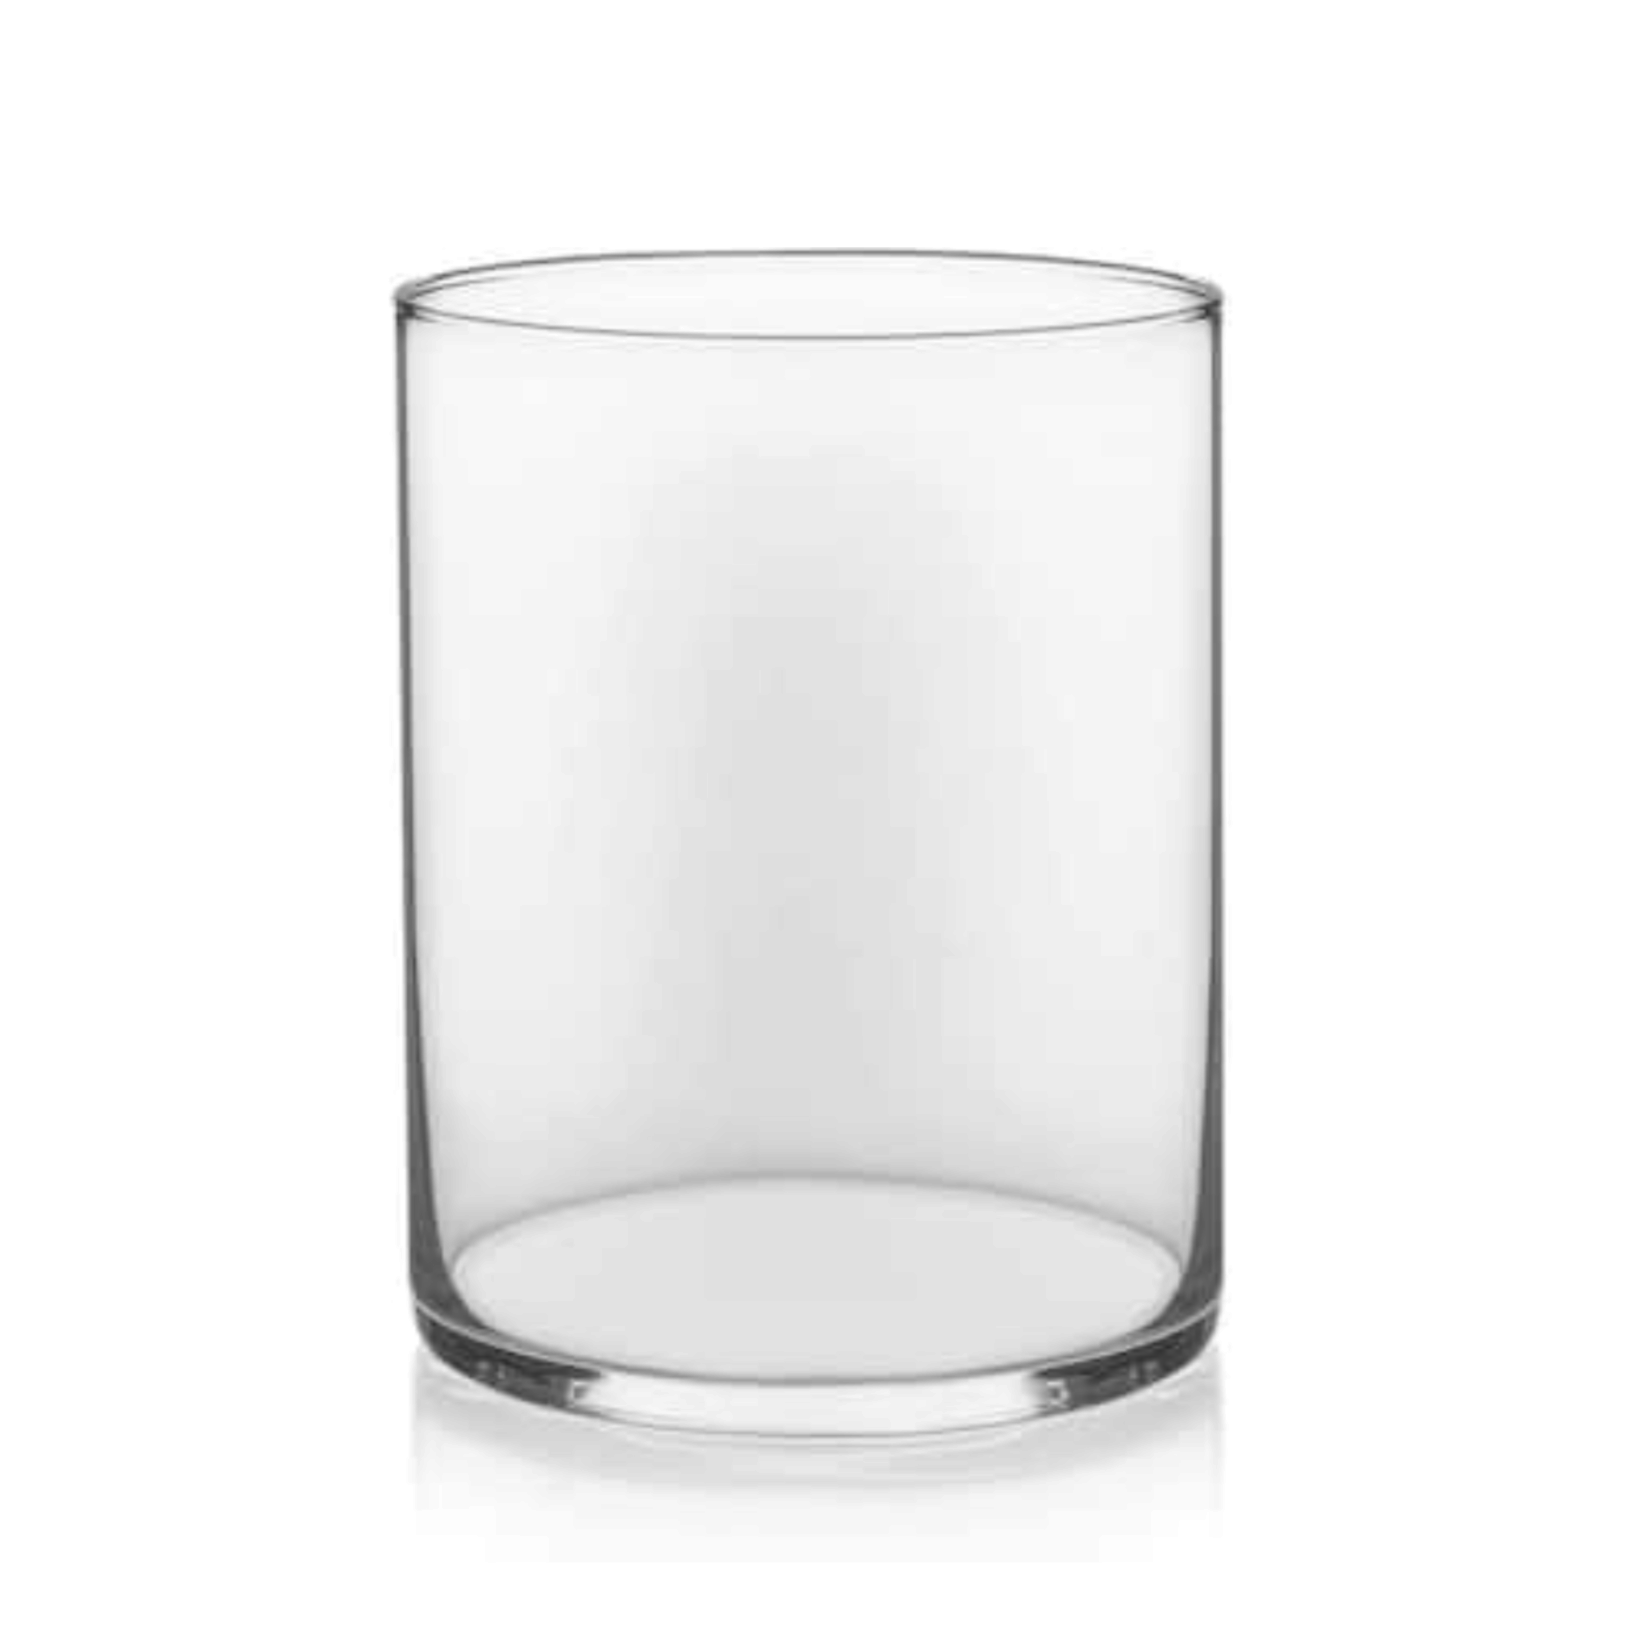 6”H X 5” CLEAR GLASS CYLINDER